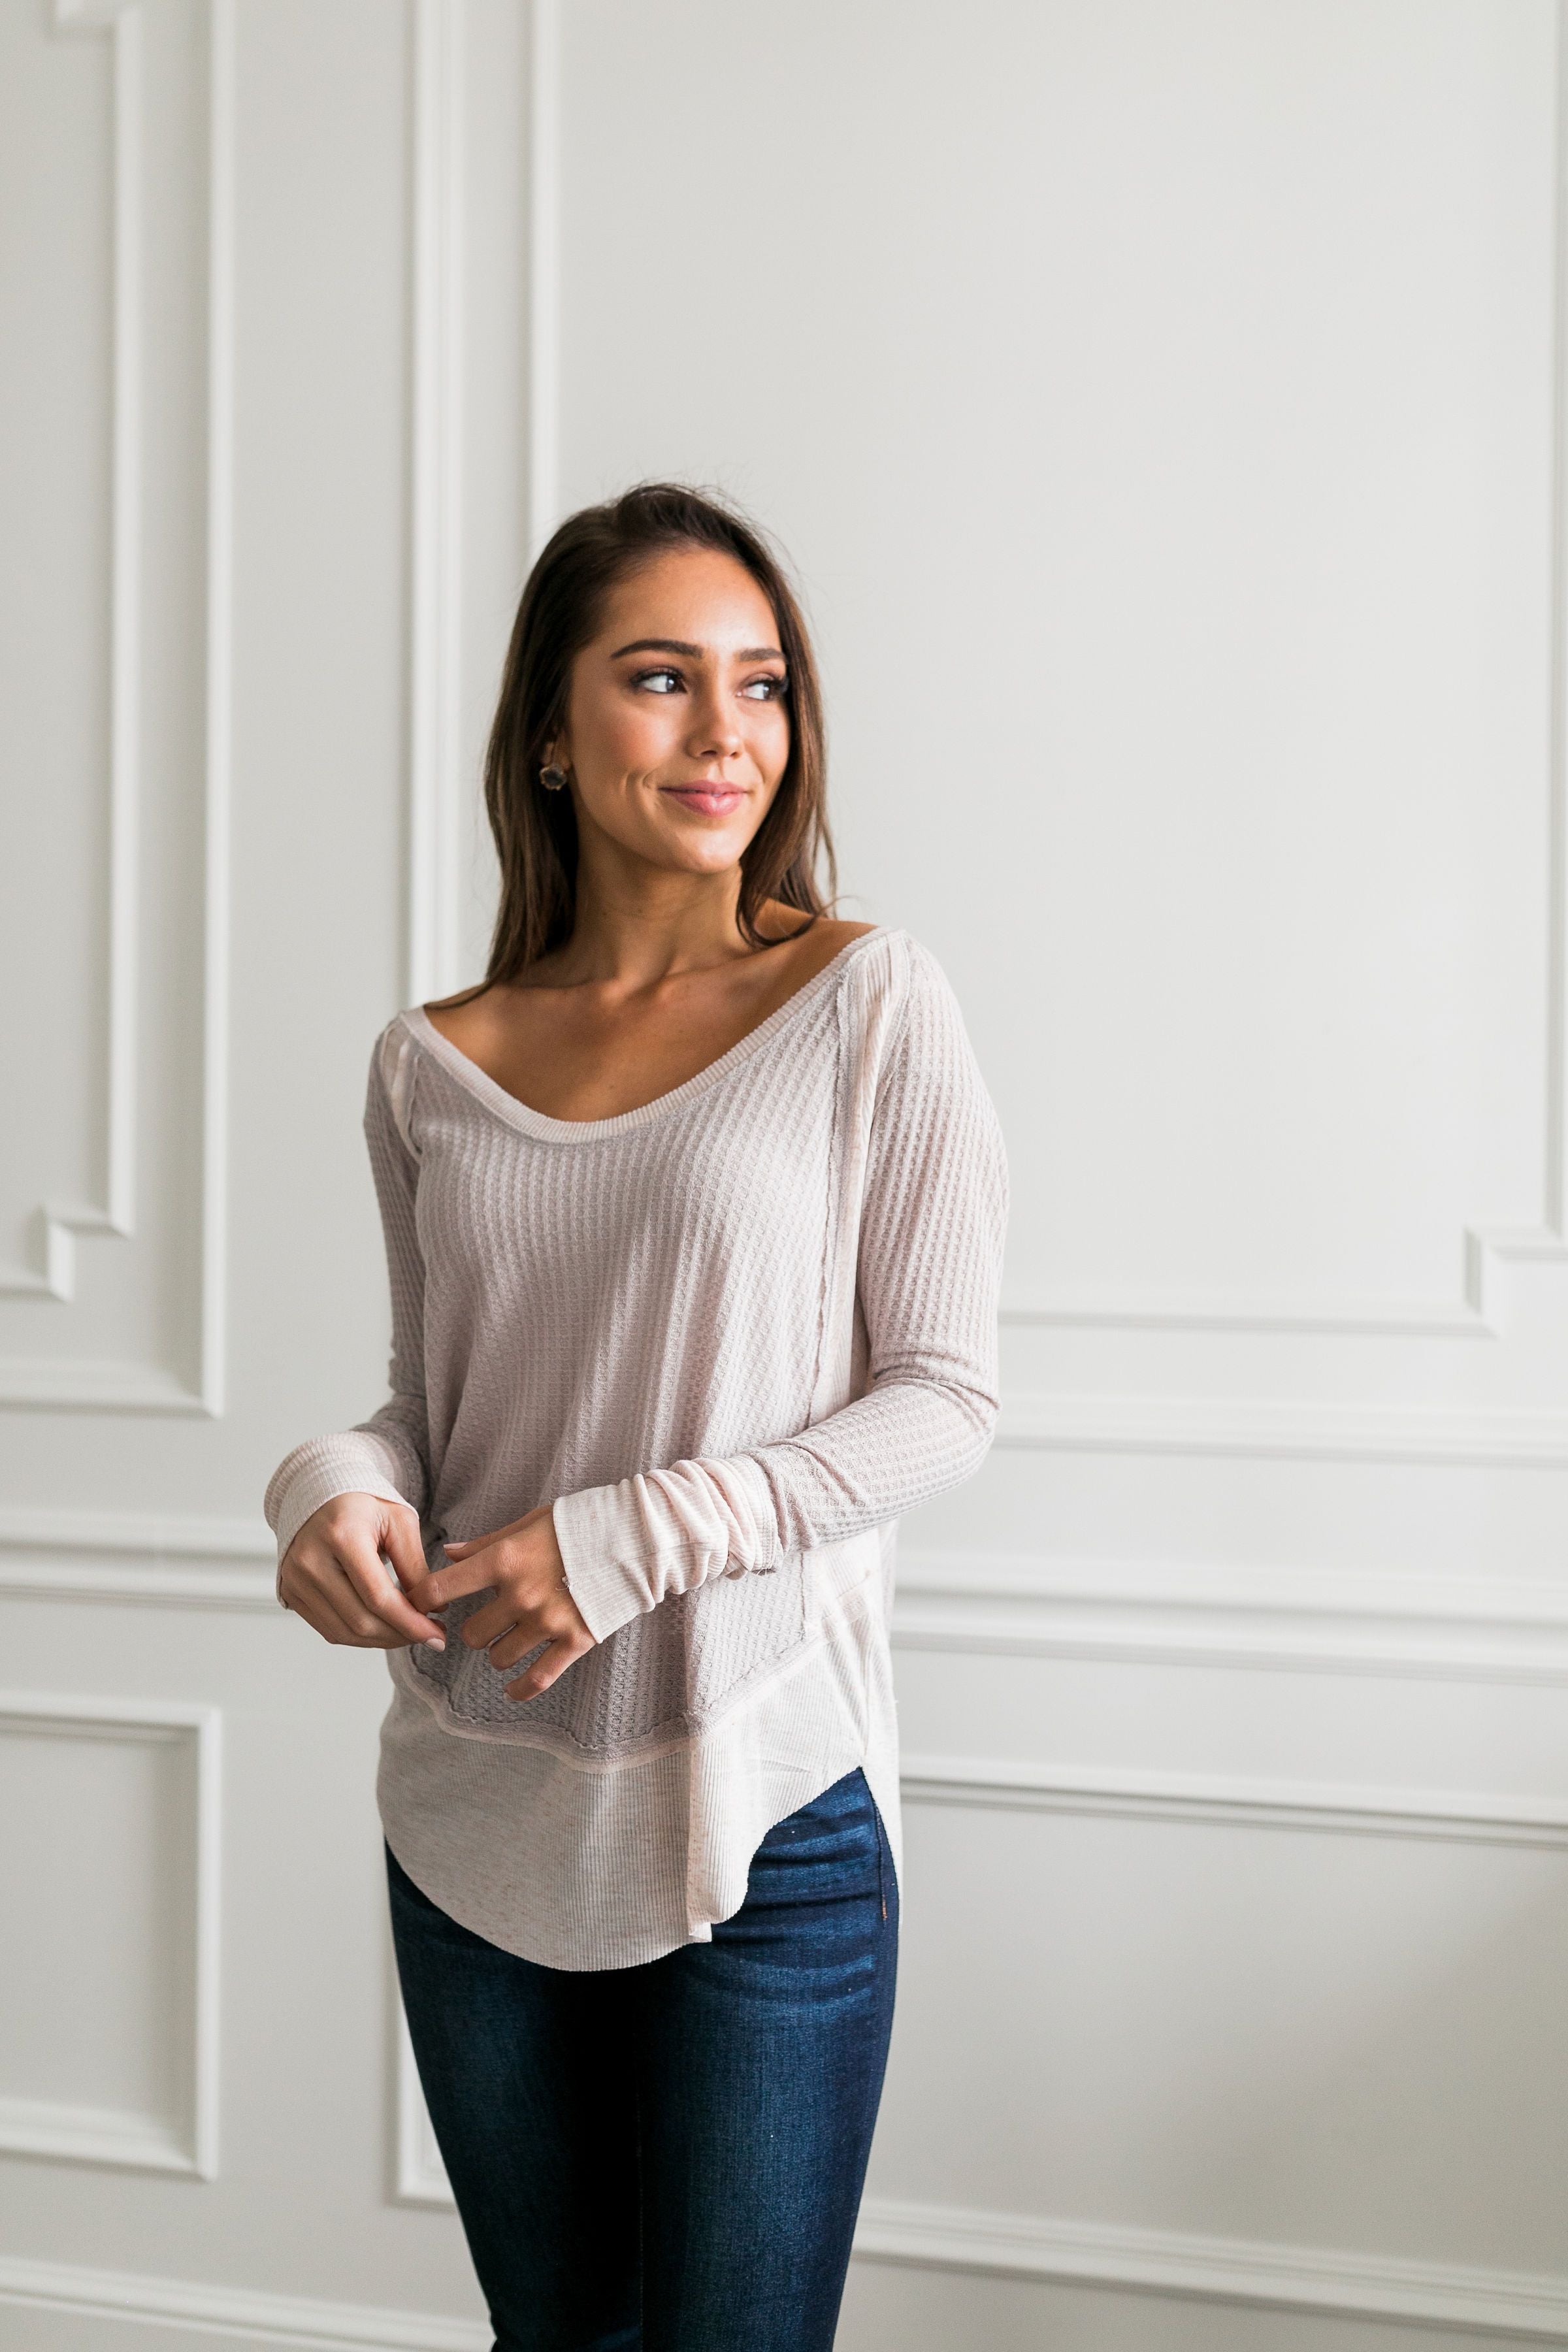 Easy Breezy Beautiful Layered Tee - ALL SALES FINAL